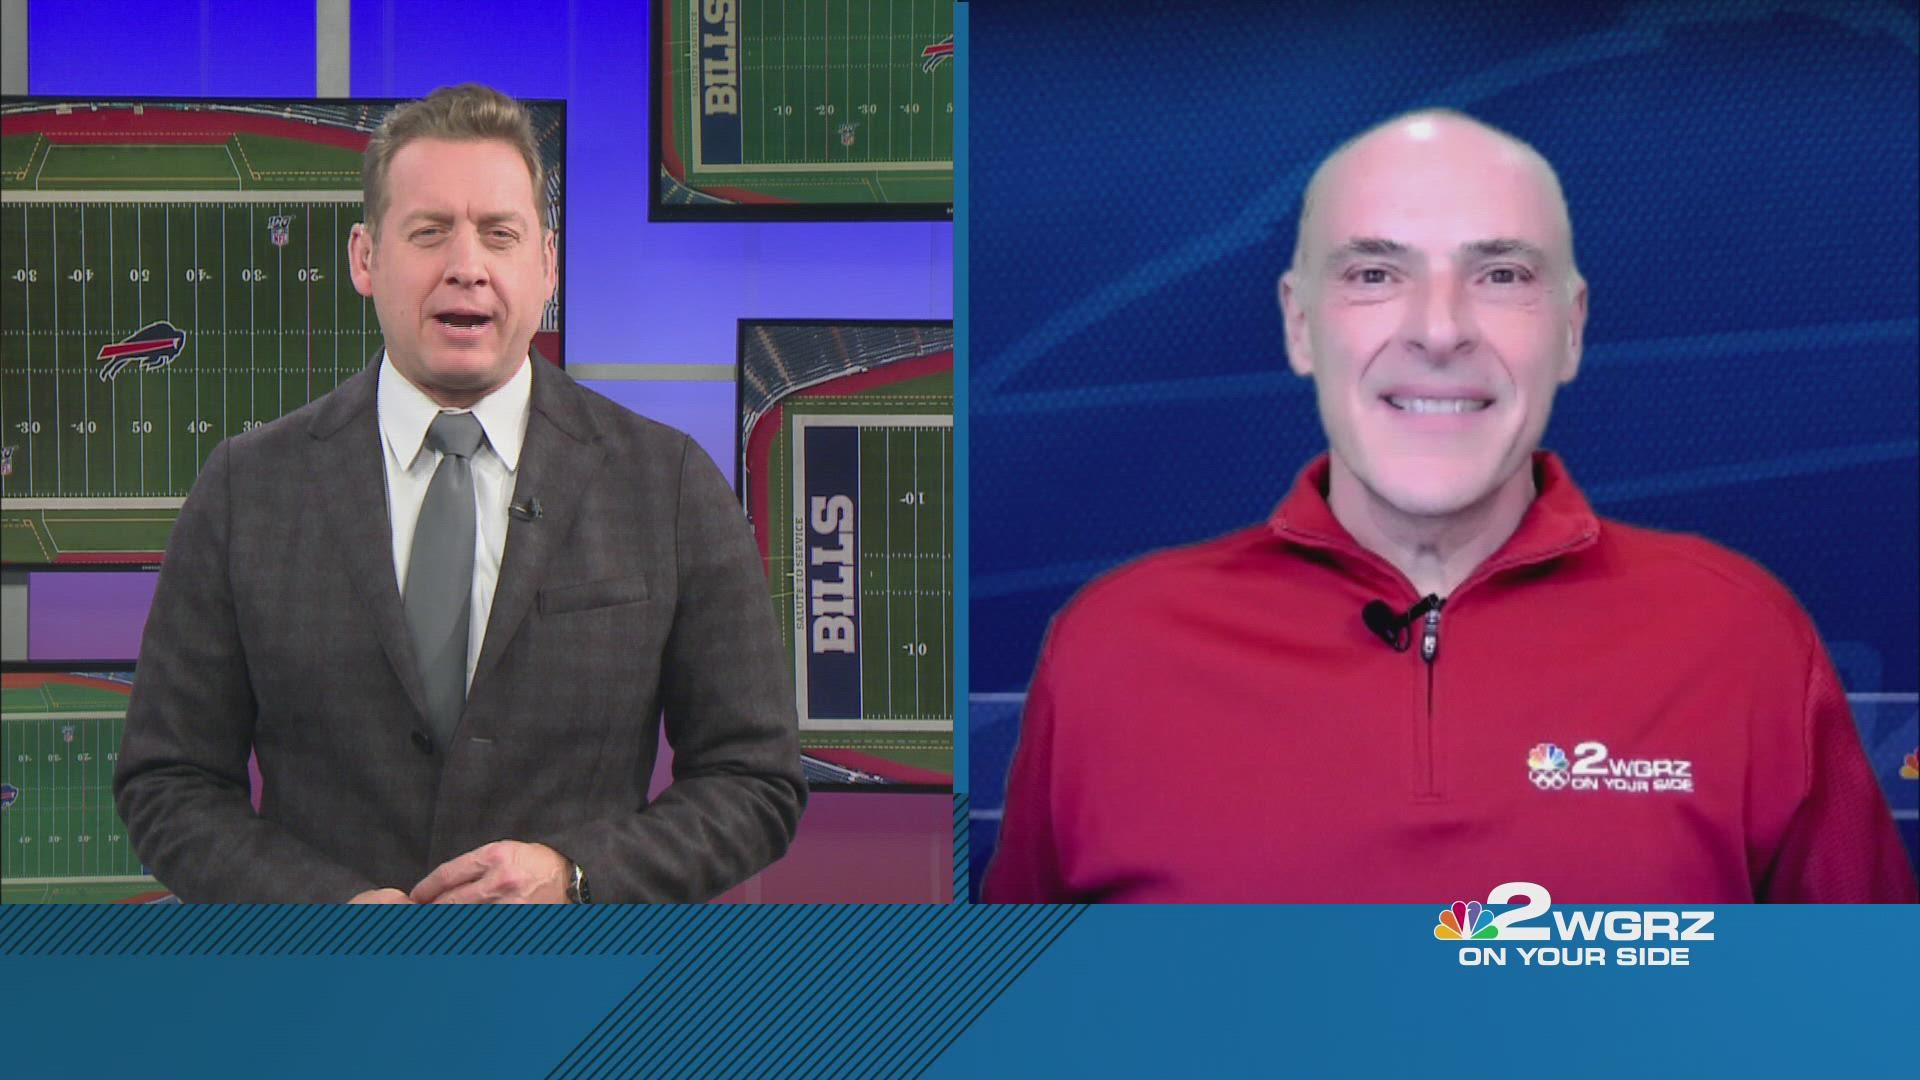 Channel 2 Sports Director Adam Benigni and WGRZ Bills/NFL Insider Vic Carucci discuss the Bills' Week 11 win against the Cleveland Browns in Detroit.